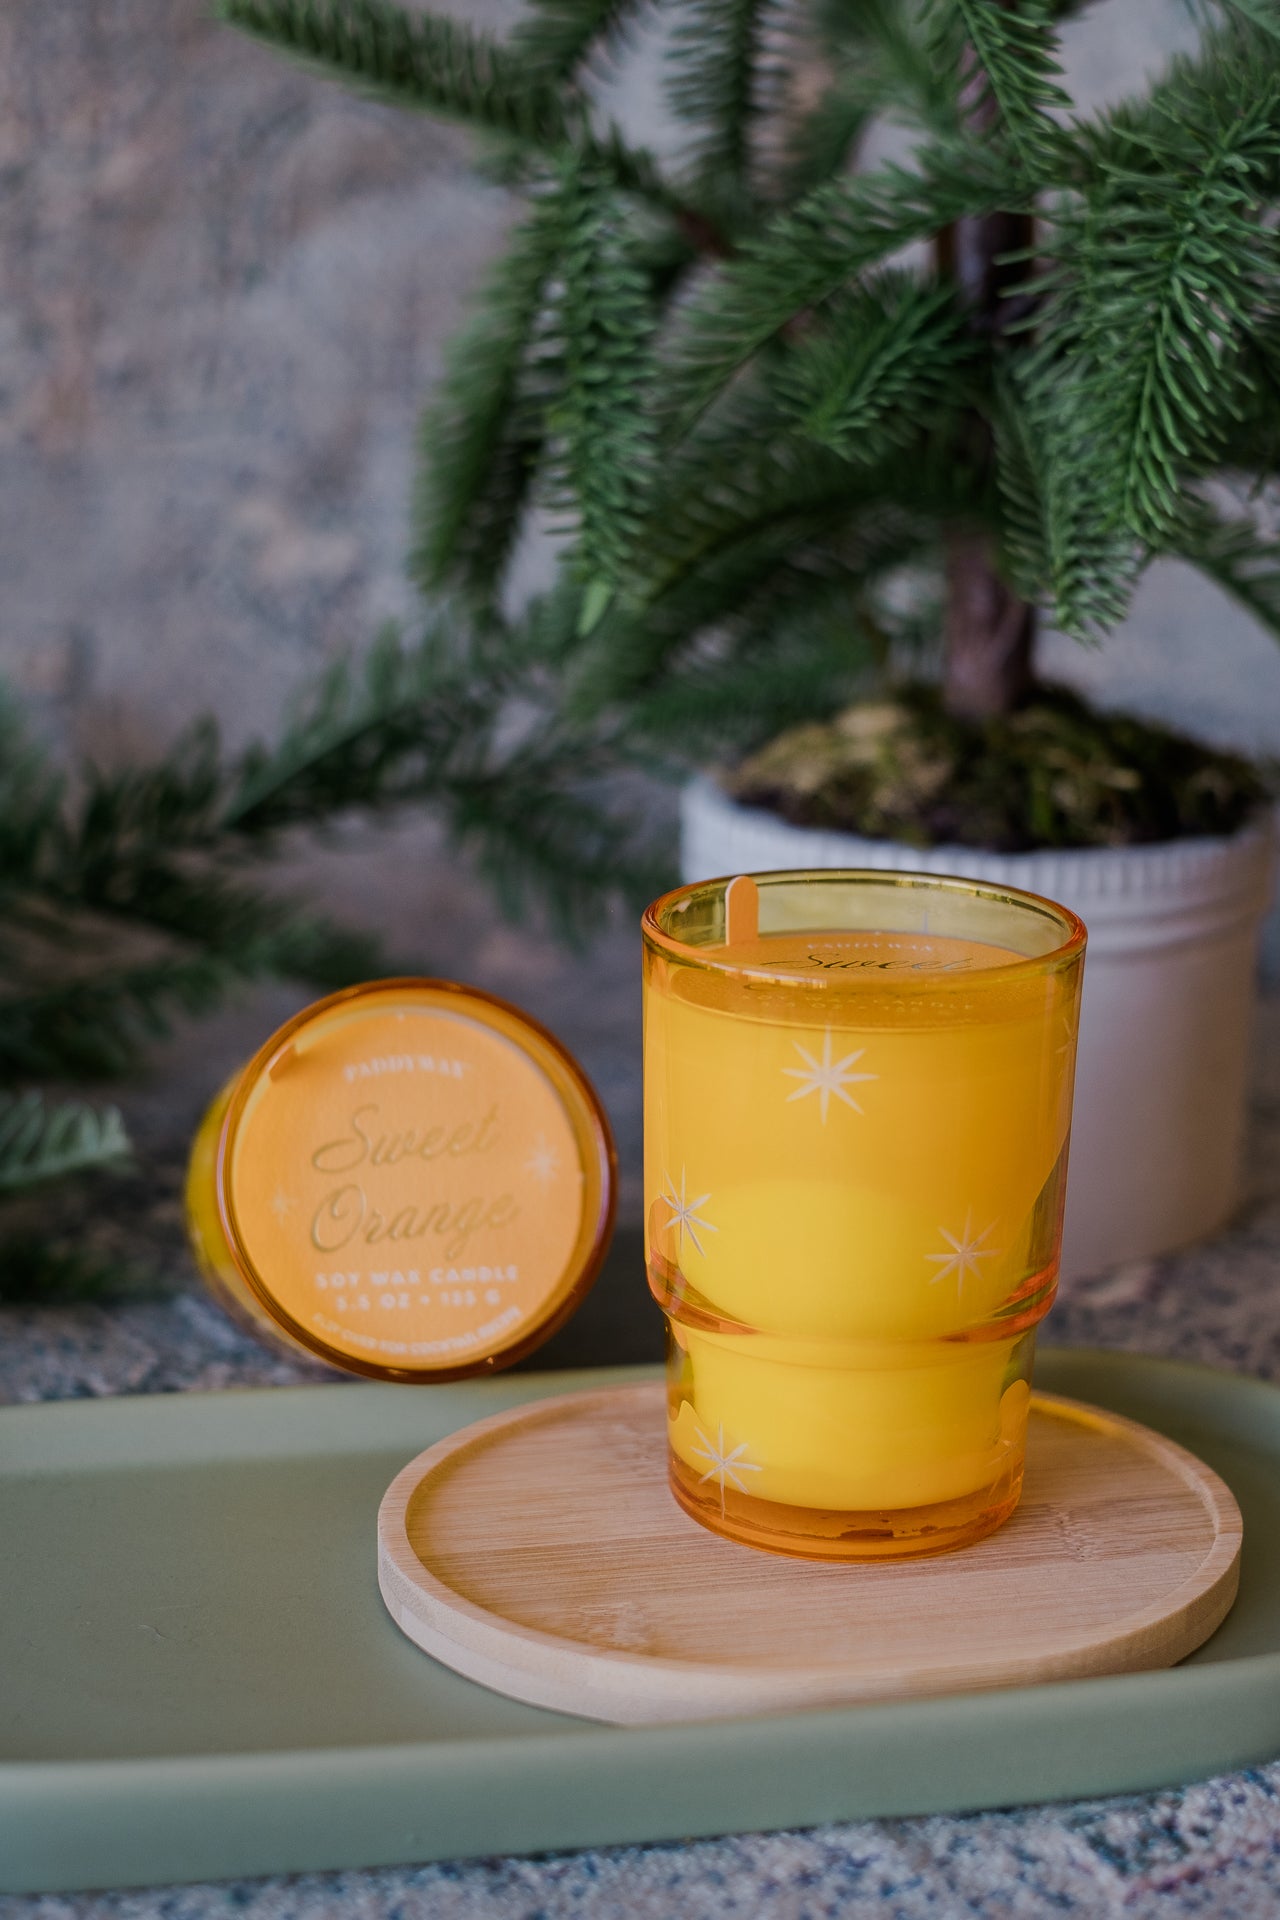 Paddywax Sweet Orange & Fir Etched Stars Candle